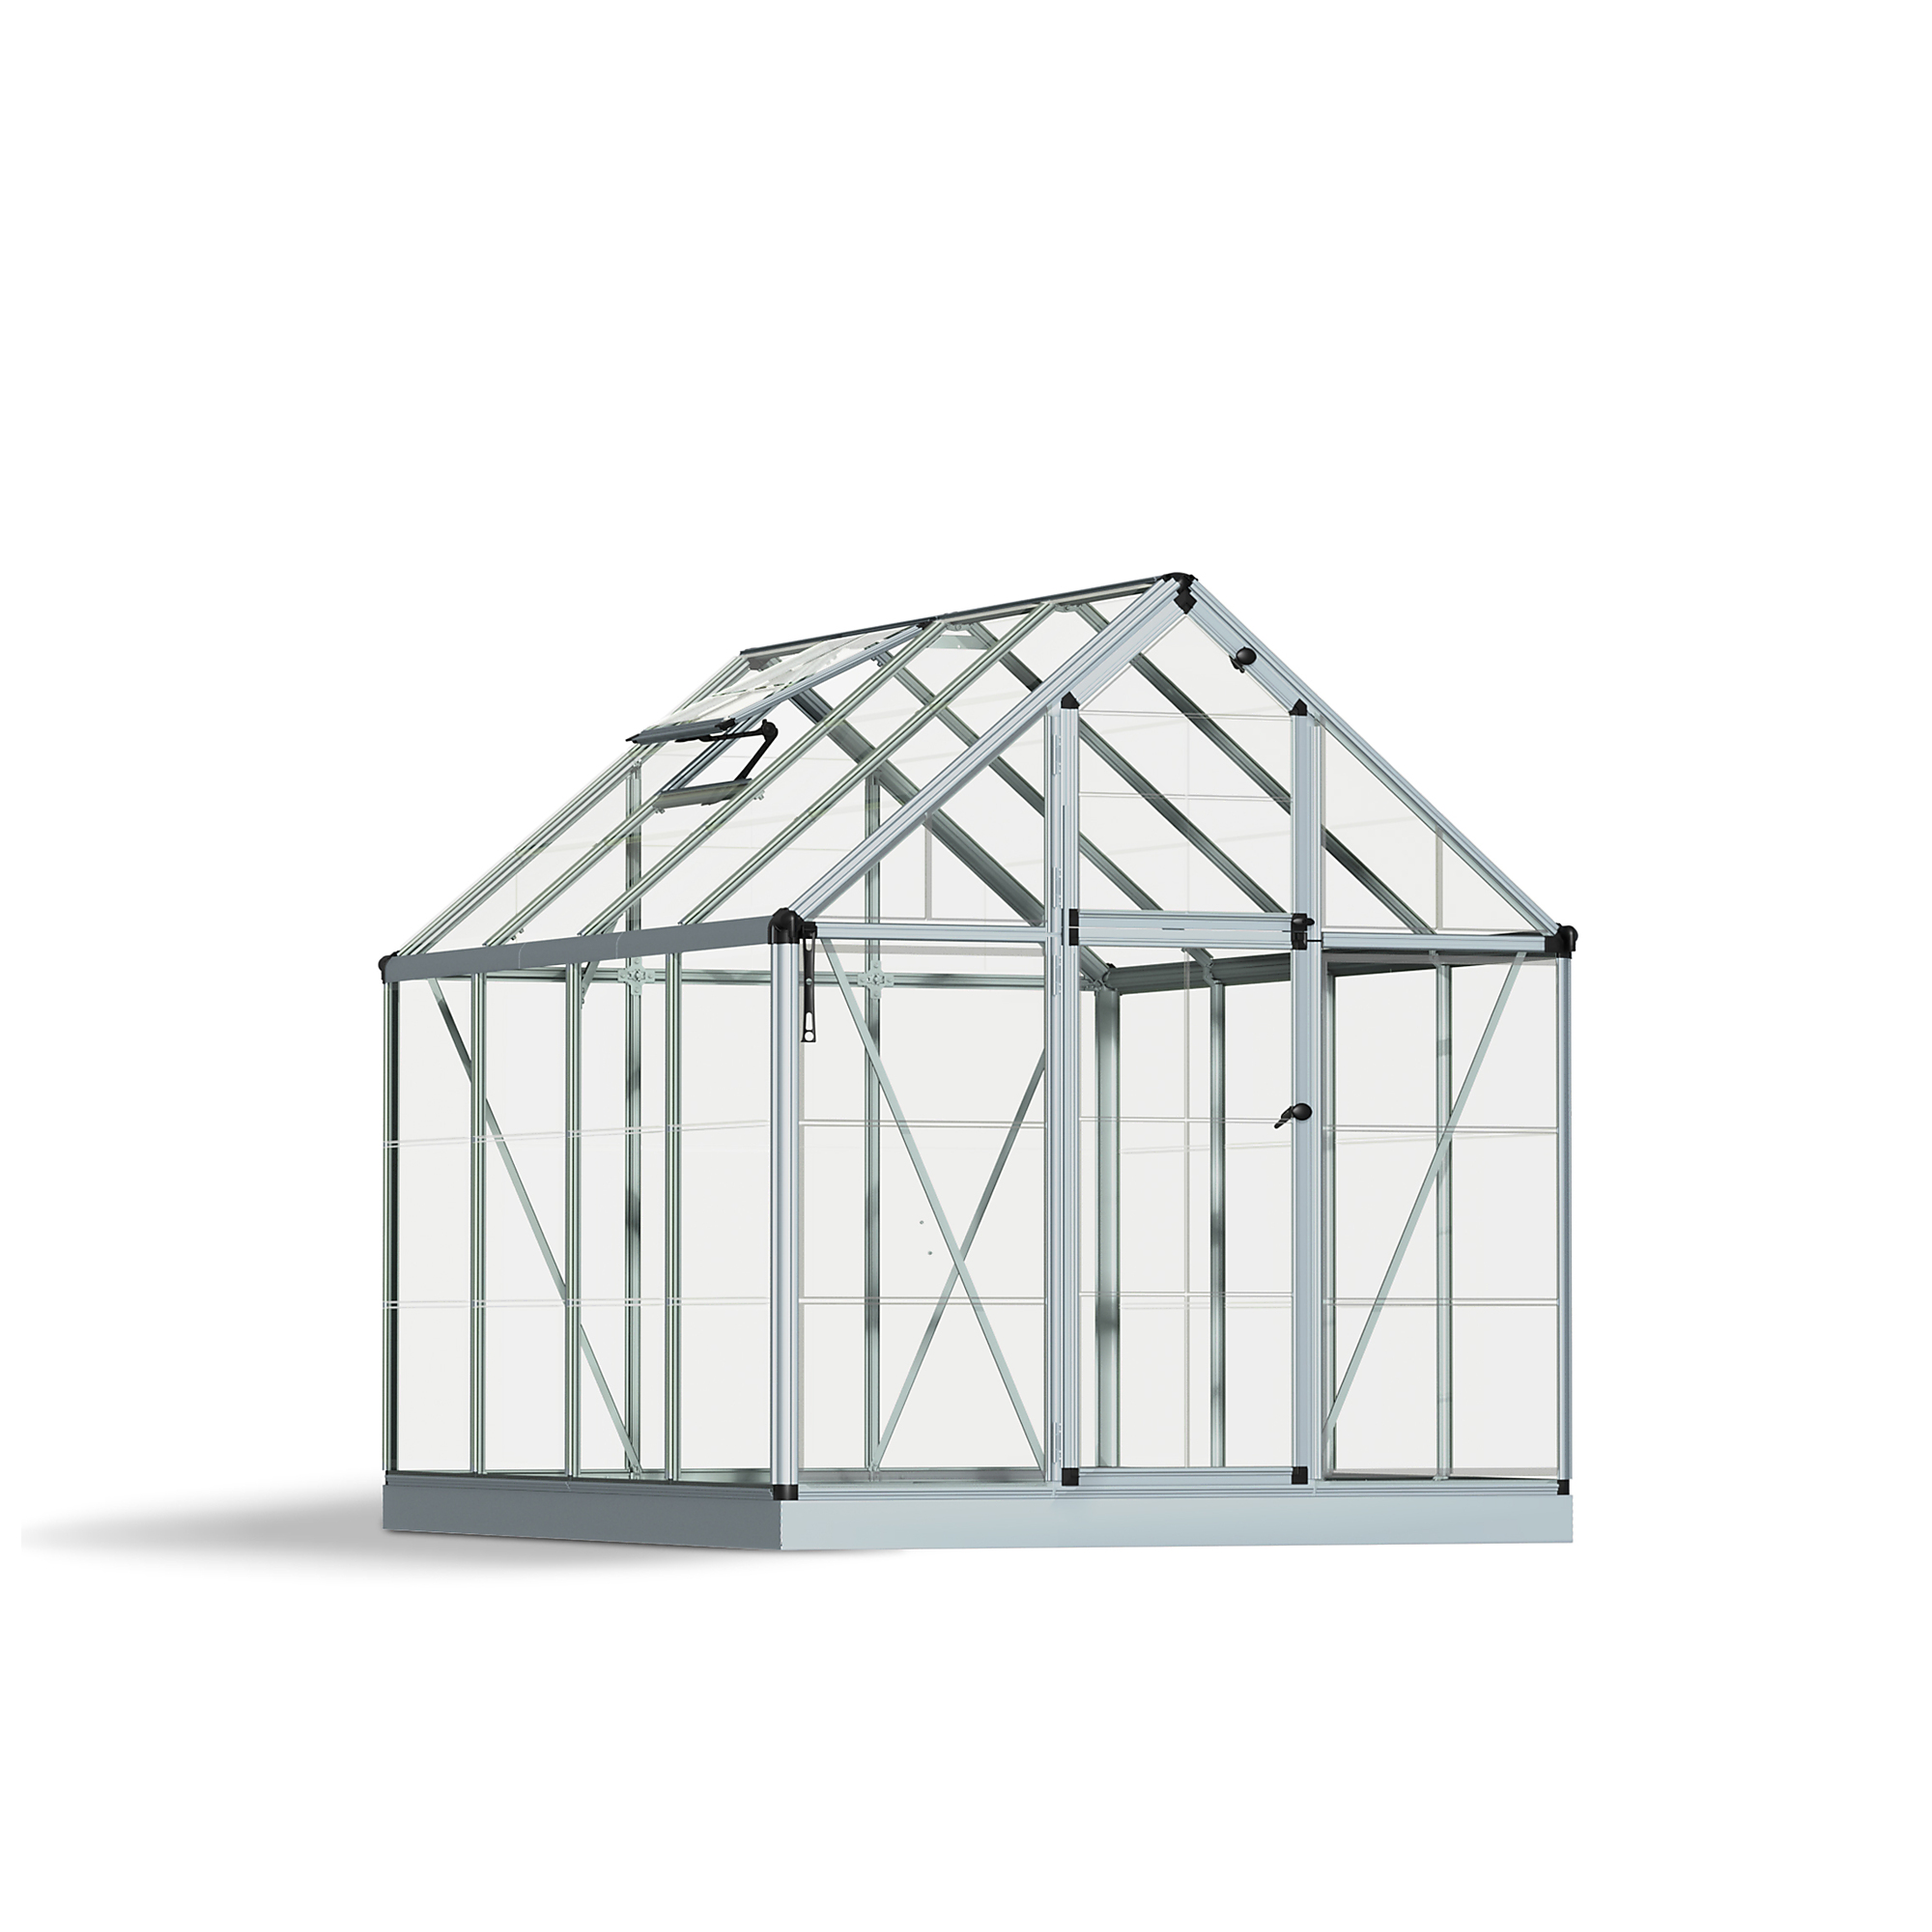 Poly-Tex Inc., 6ft. x 8ft. Greenhouse - Silver, Length 100.8 in, Width 75.6 in, Center Height 82.5 in, Model 706106